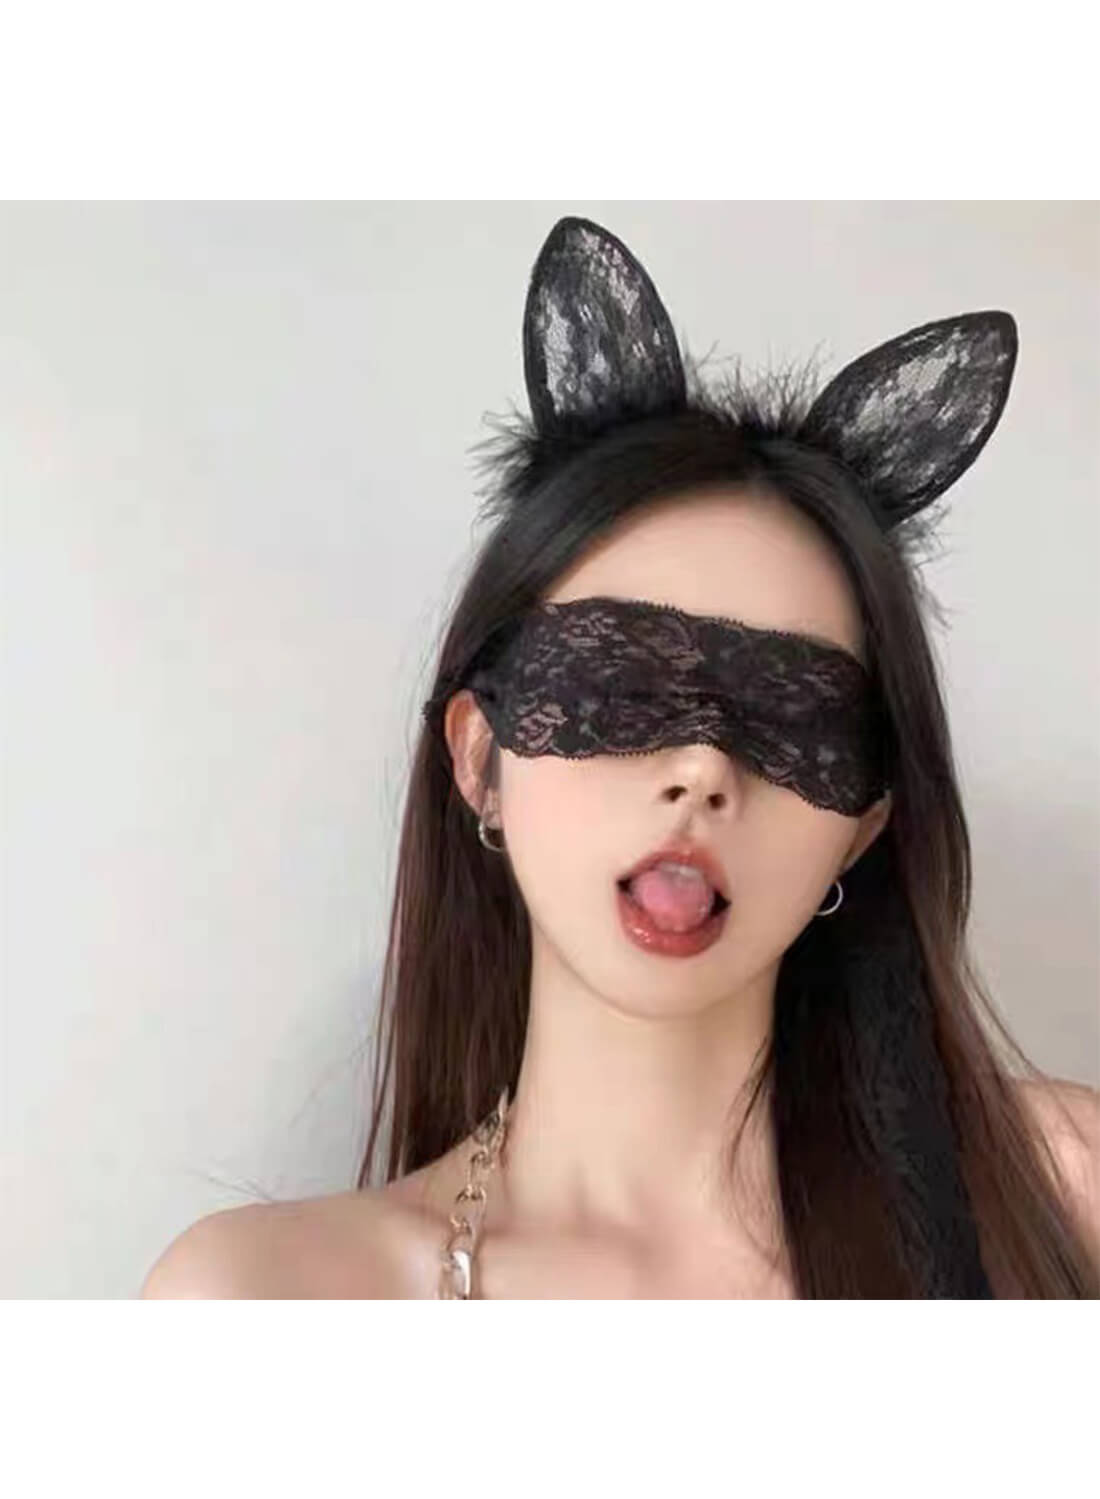 Lace Eye Mask and Lace Bunny Ears for Women